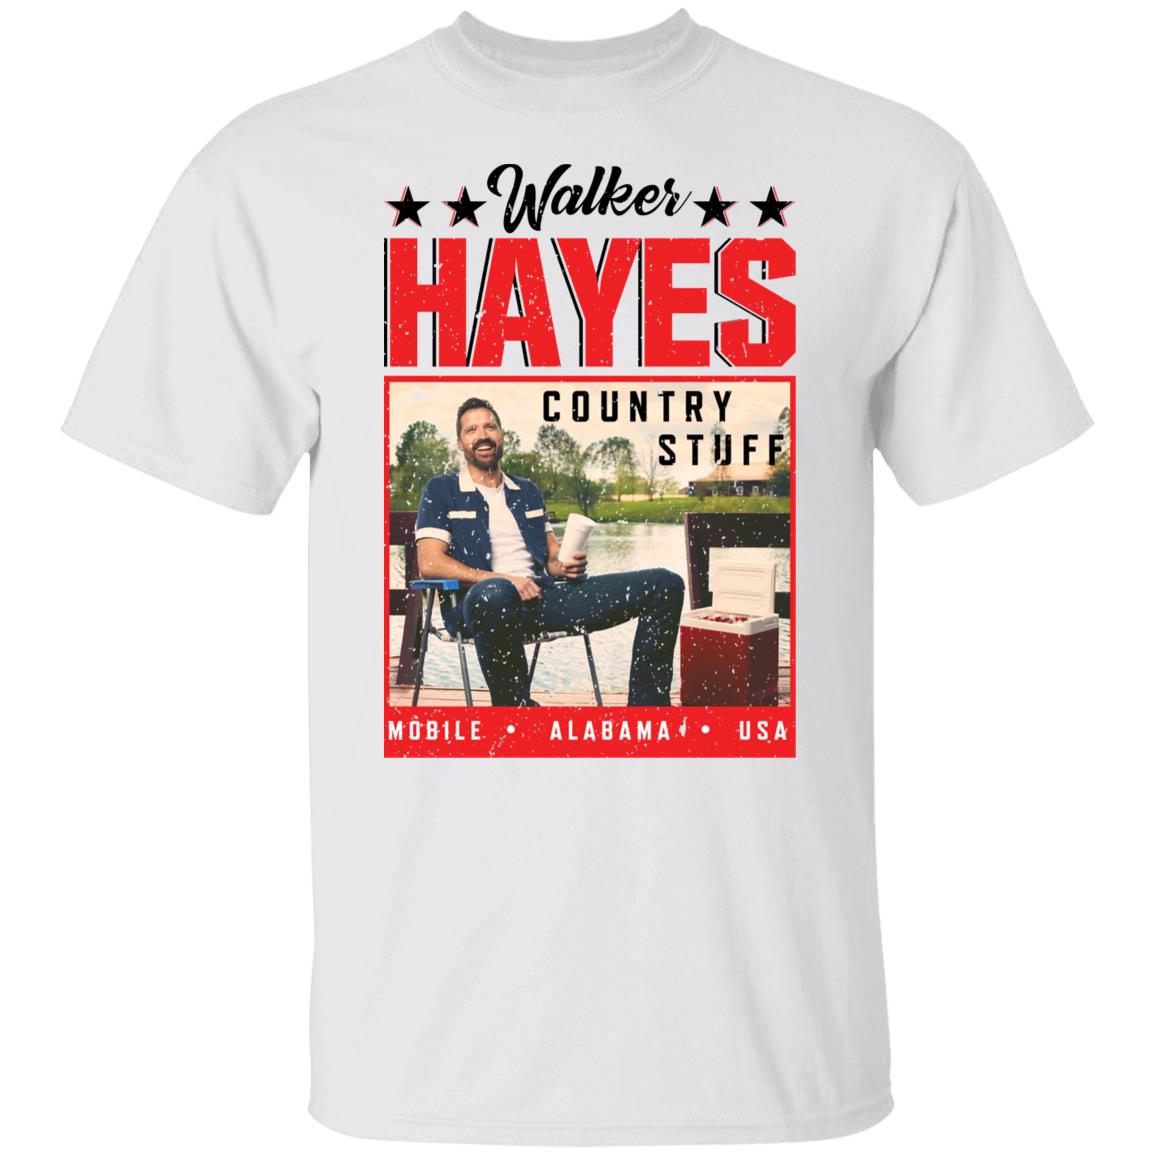 Walker Hayes "Country Music" Personalized T-shirts 